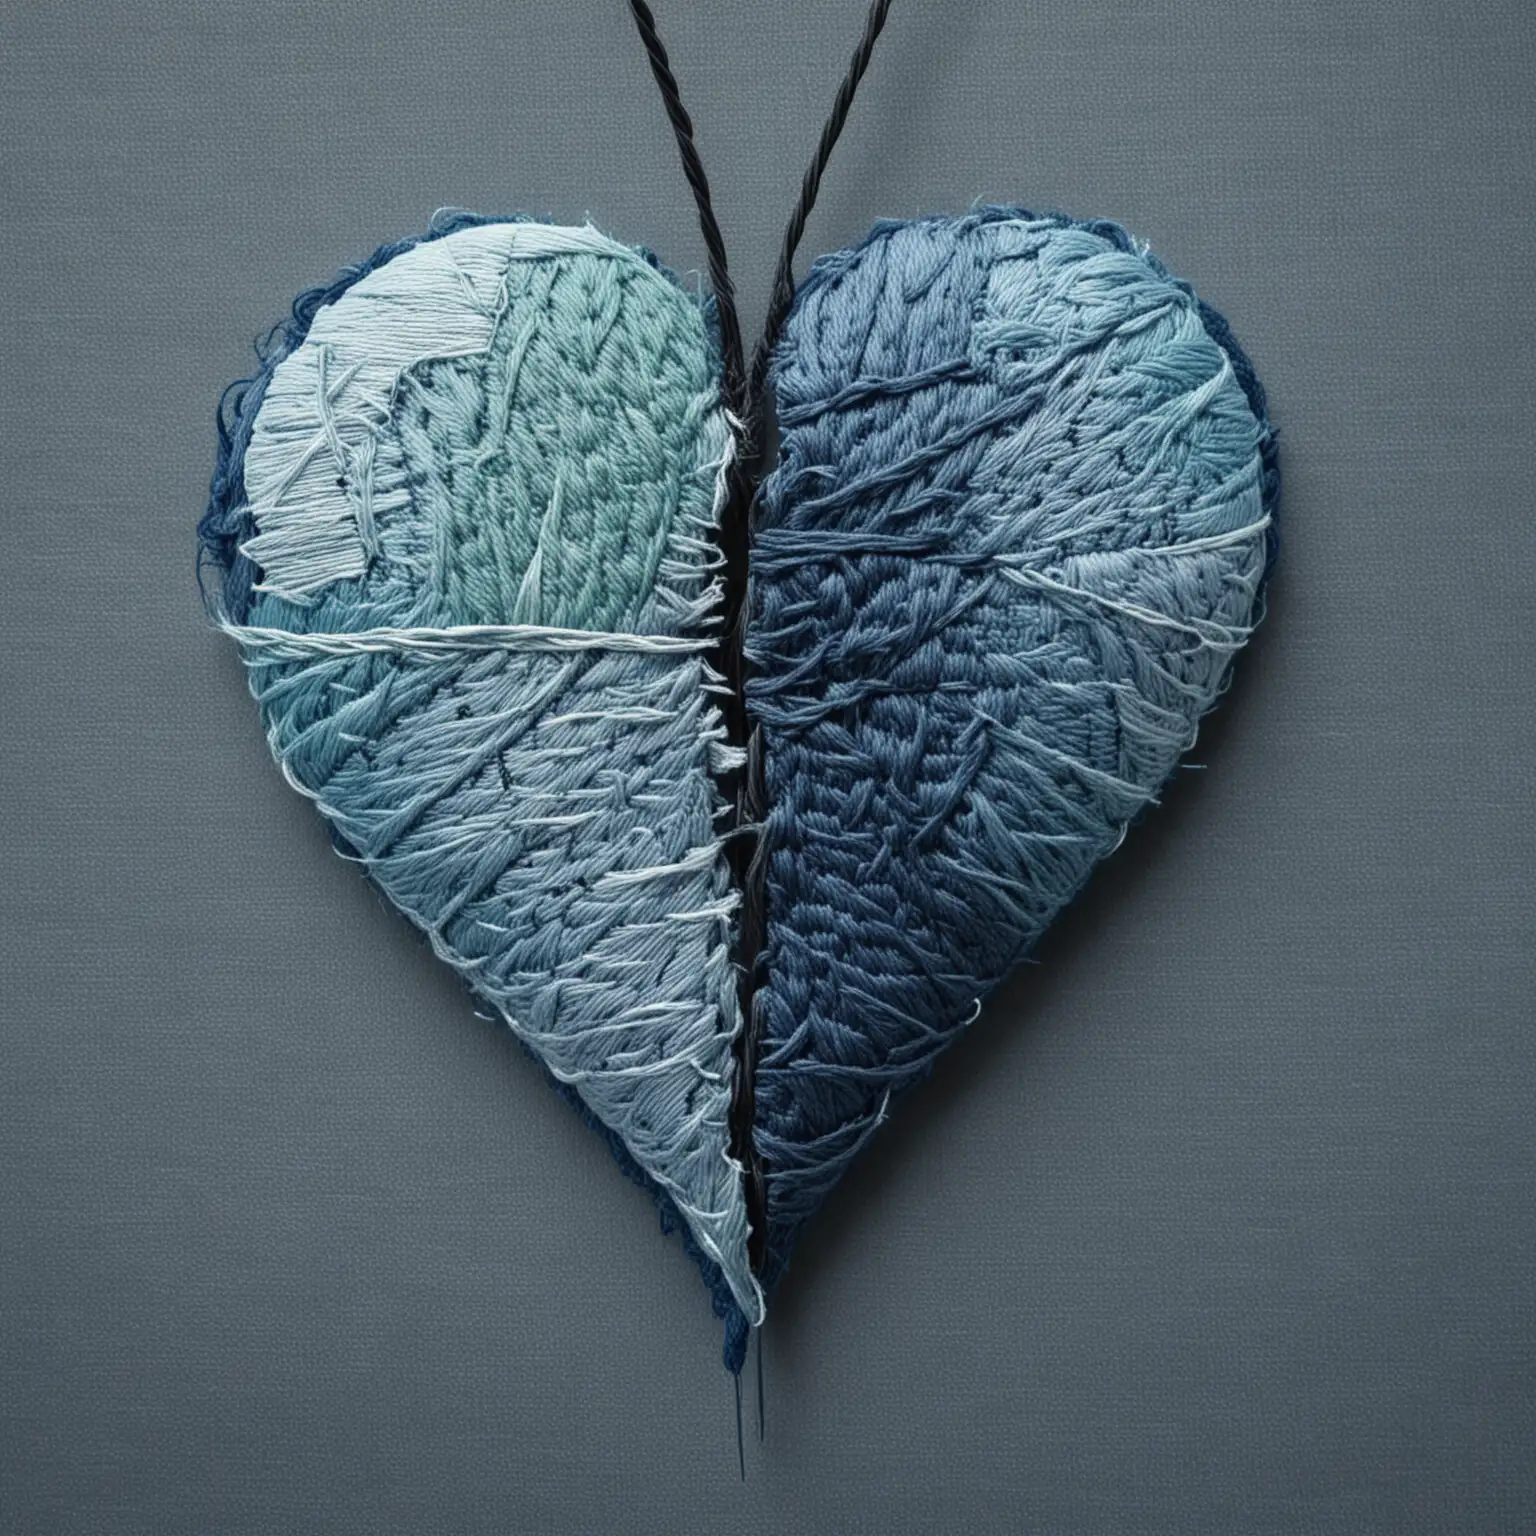 prompt: image, dark blue vibrant pastel half broken heart. bottom half of the heart has been sewn with a needle with black thread up to the middle of the heart